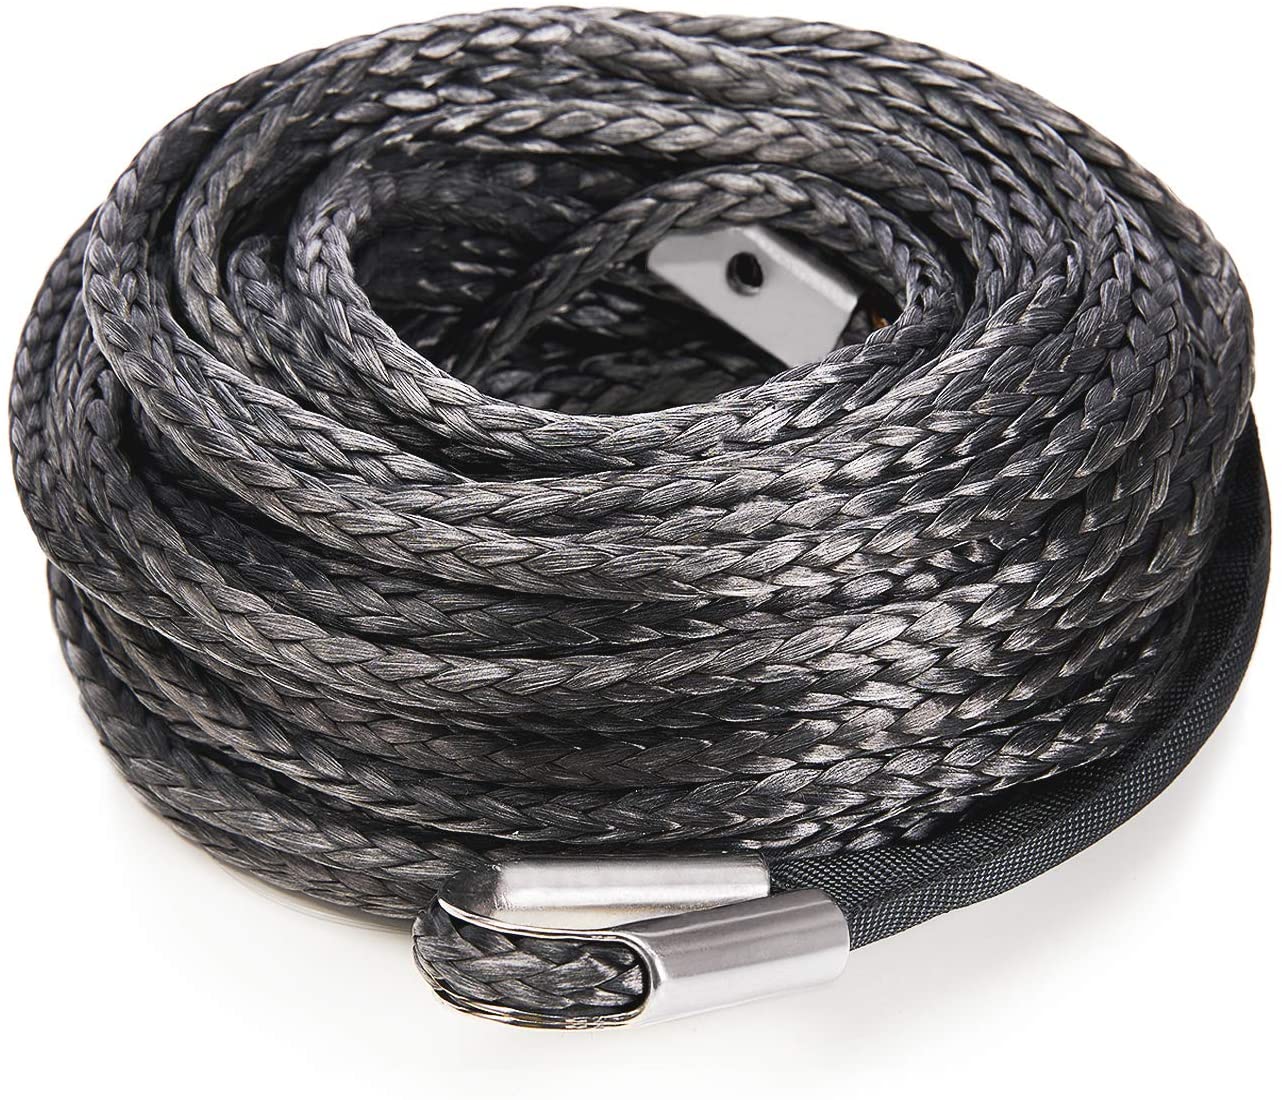 types of rope - synthetic